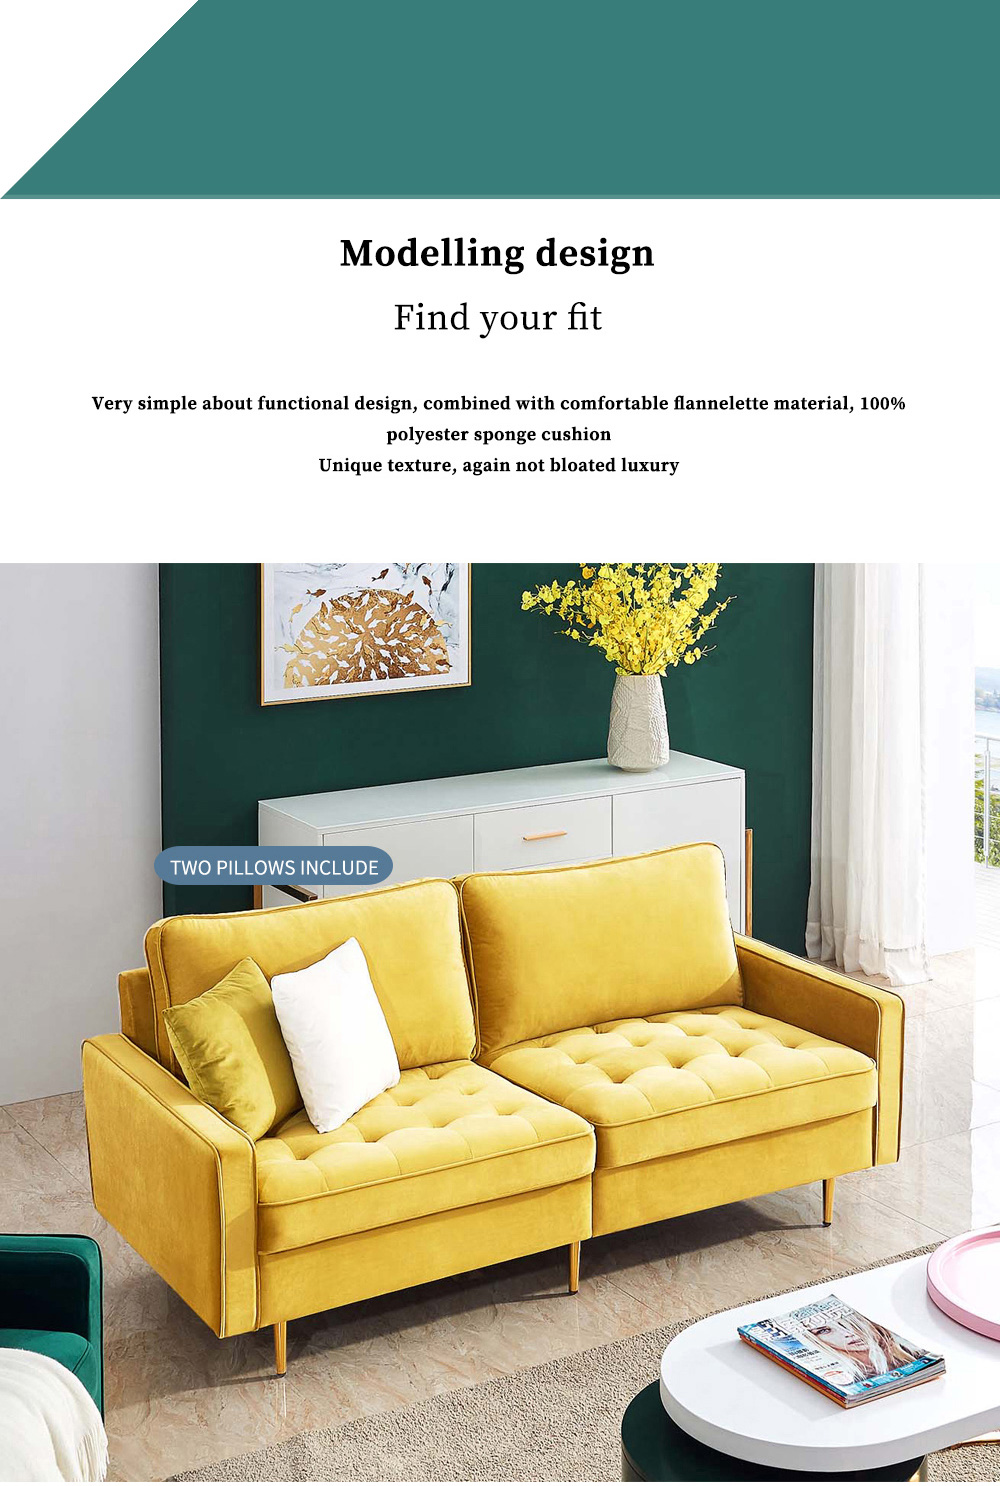 71" 3-Seat Velvet Upholstered Sofa with 2 Pillows, Wooden Frame and Metal Feet, for Living Room, Bedroom, Office, Apartment - Yellow